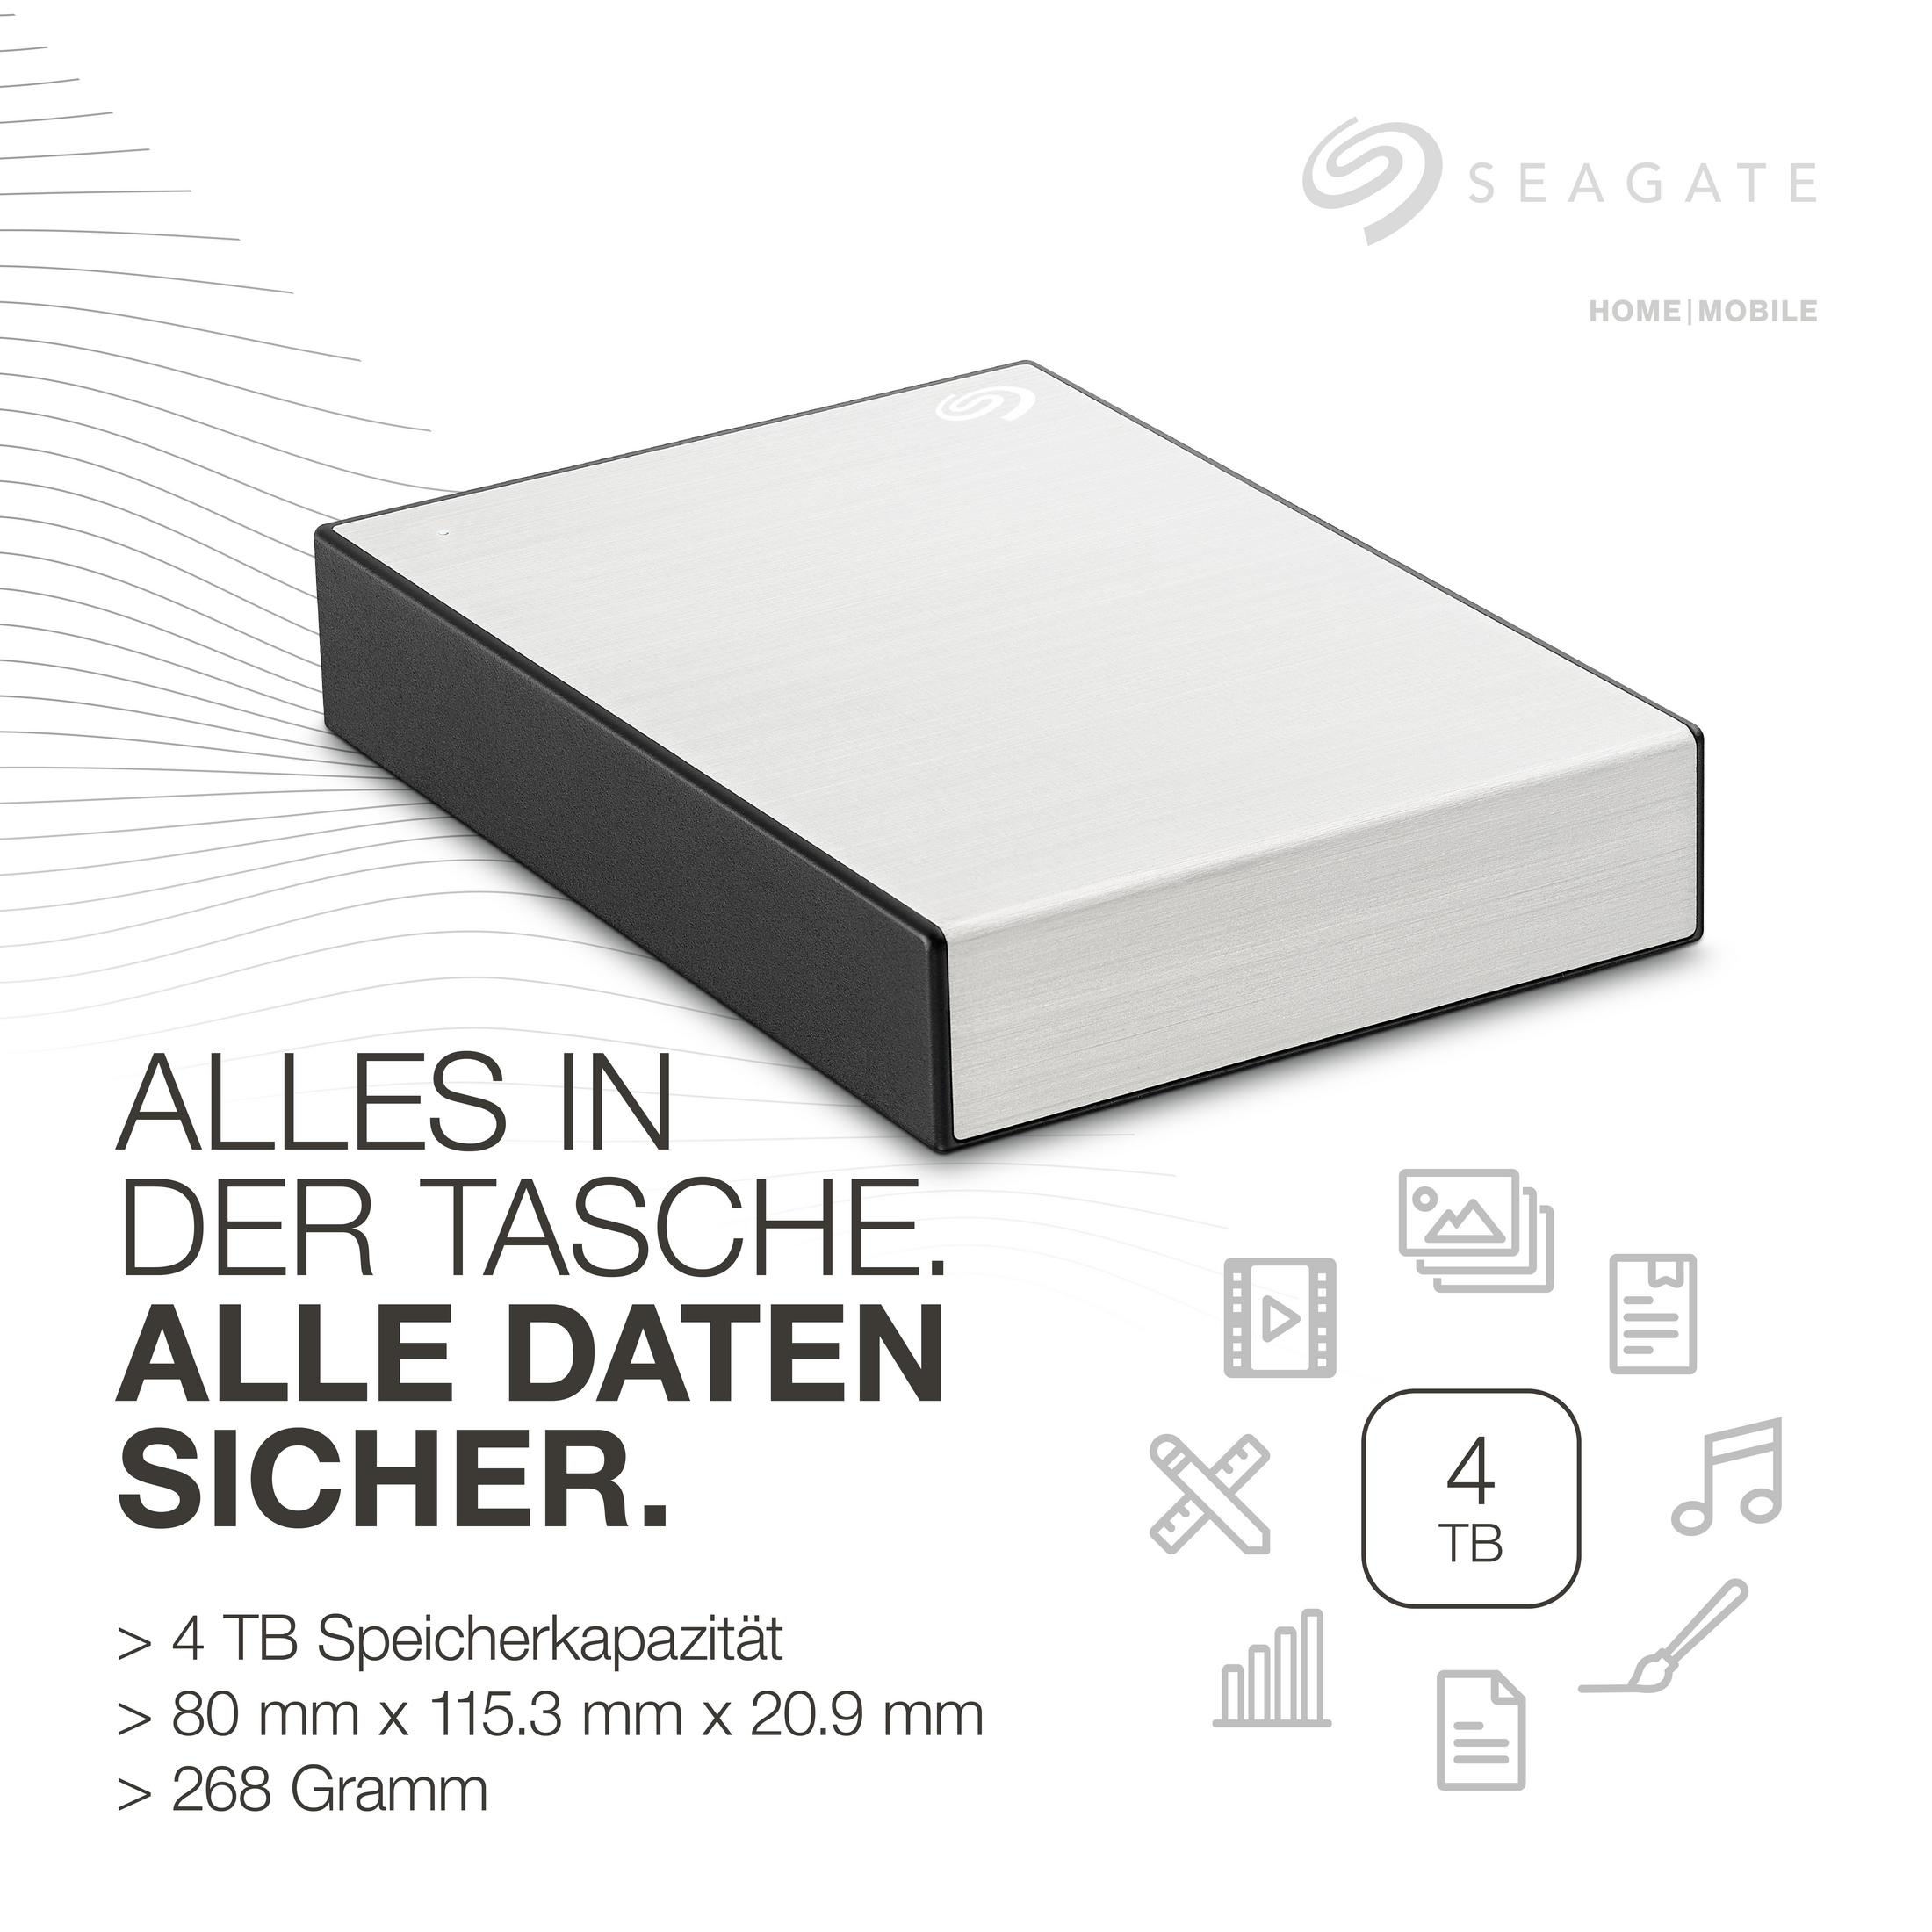 SEAGATE STKC4000401 Zoll, Silber extern, 4TB HDD, TB 2,5 SILBER, 4 ONETOUCHPORT